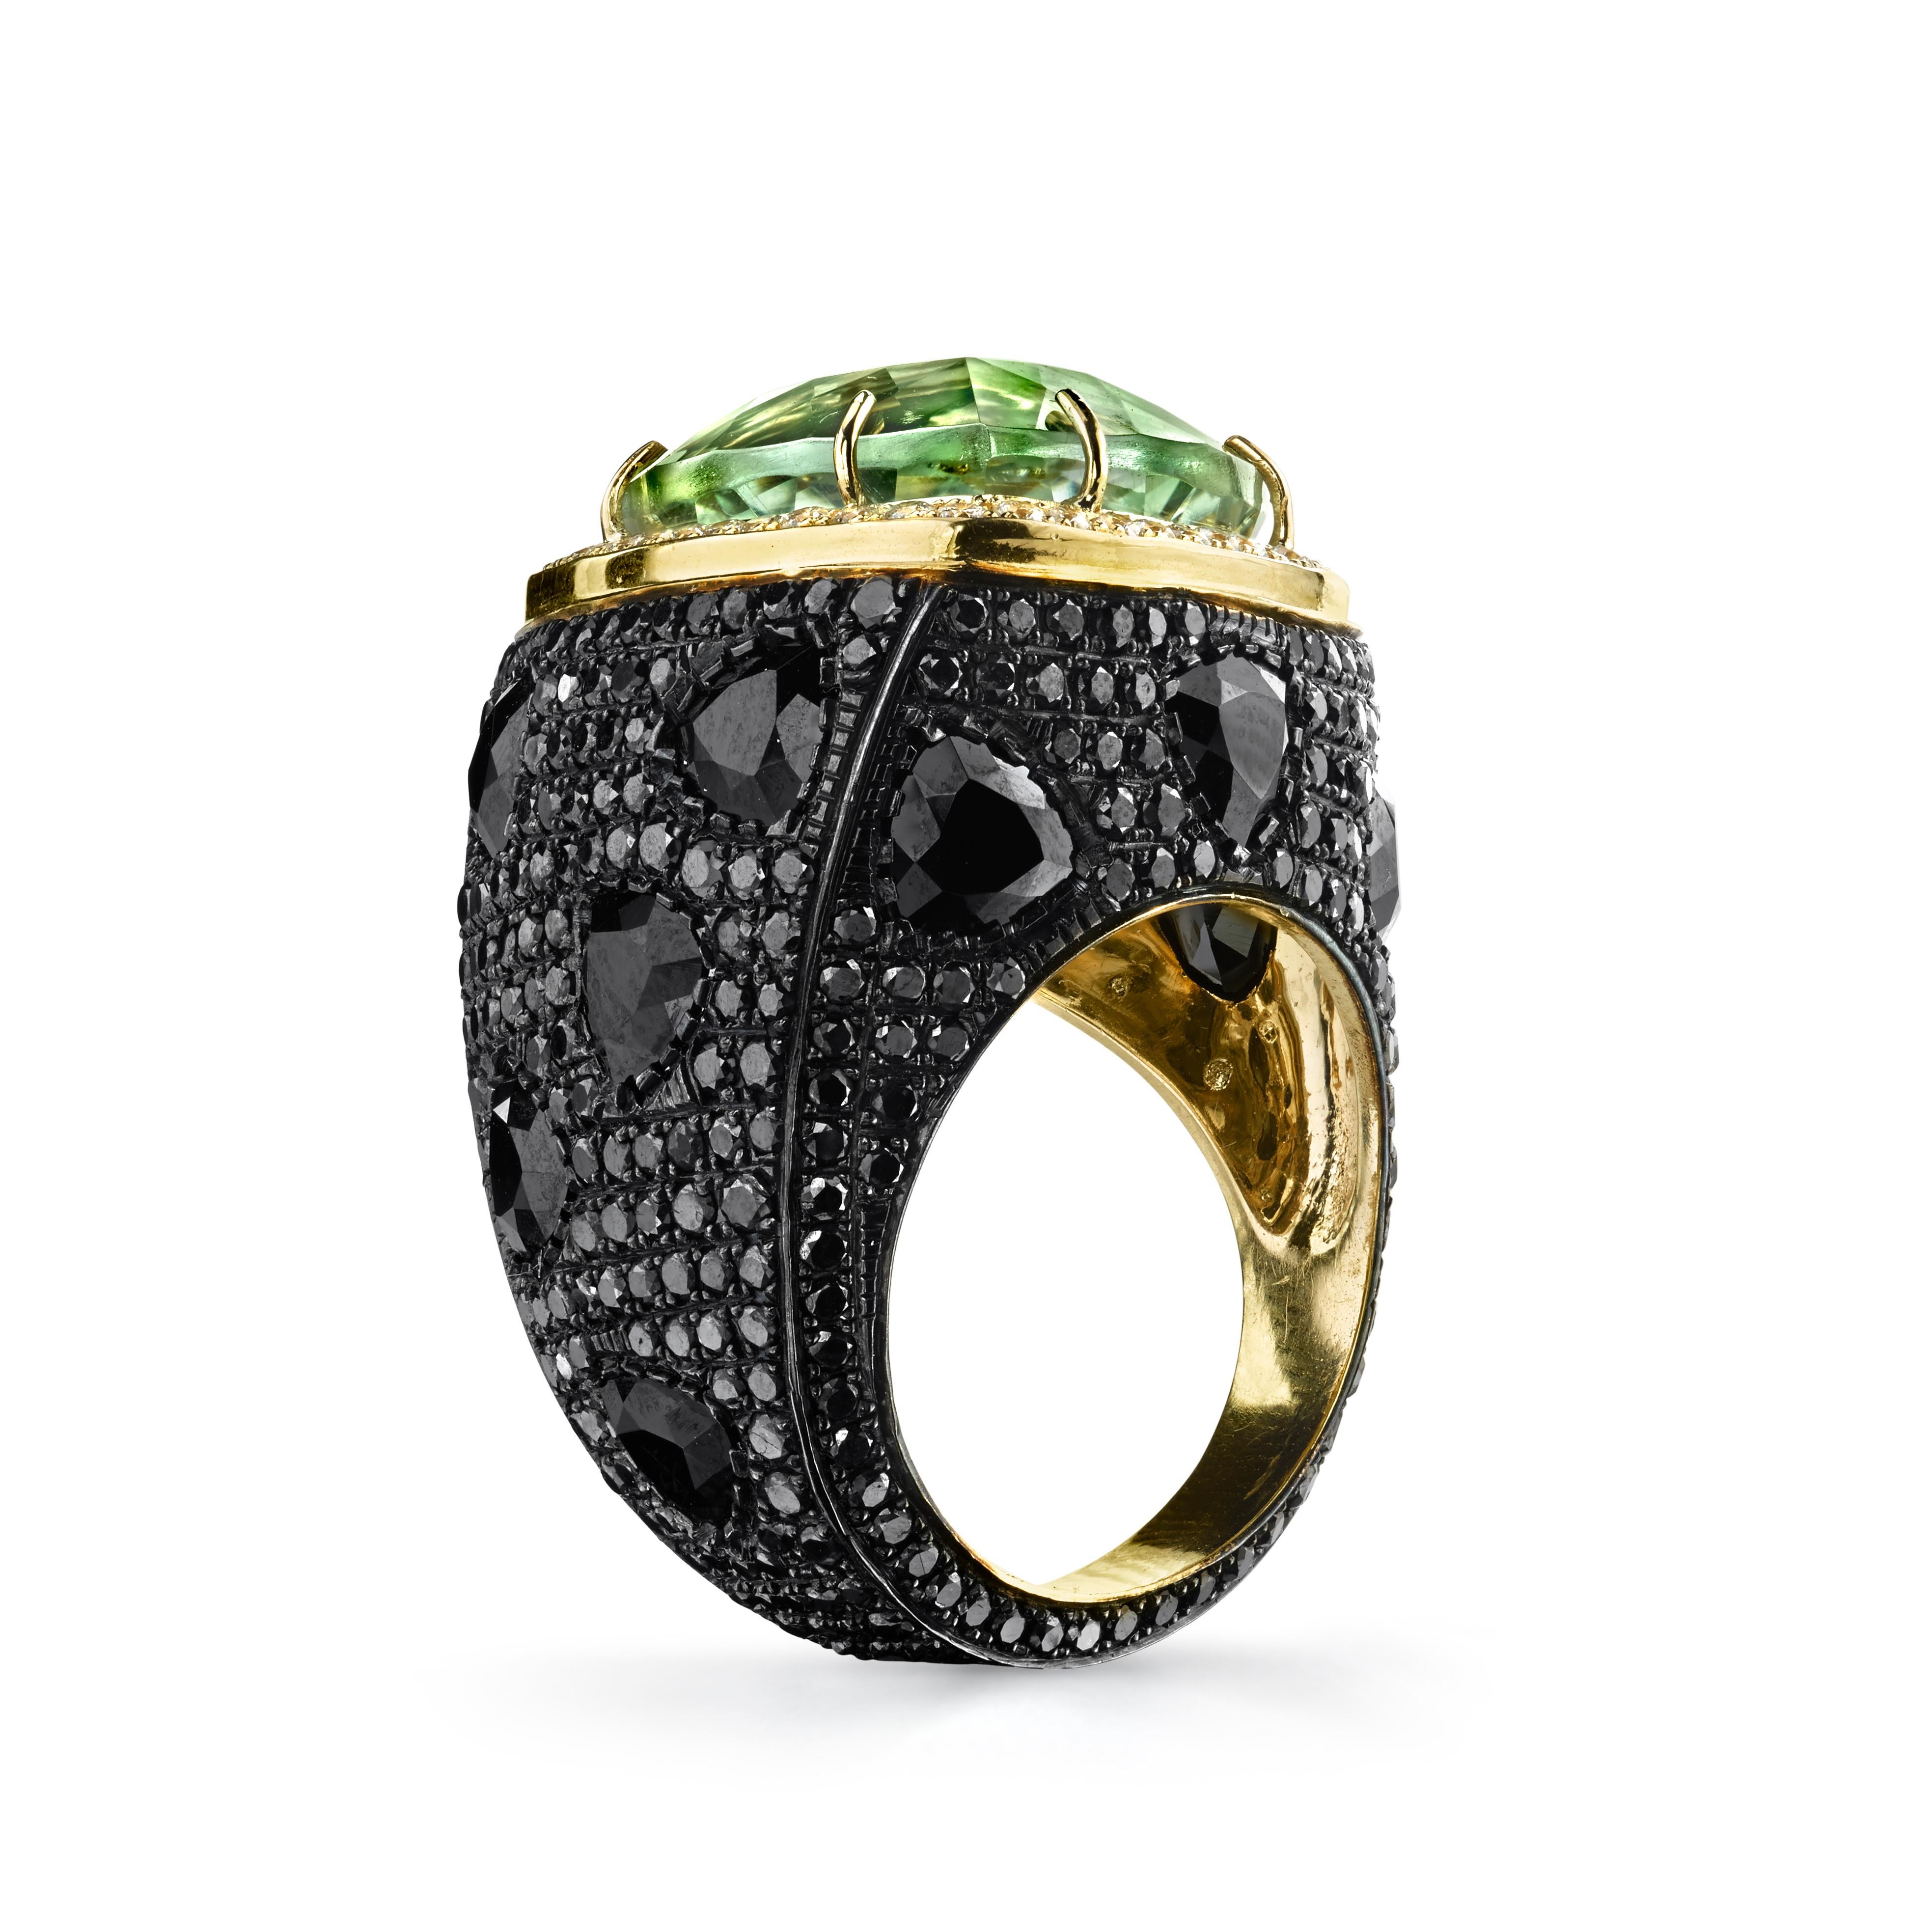 Colorful Green Prasiolite Spinel Black Diamond Triangle Cocktail Ring features a trillion cut green Prasiolite, White diamond trim, black diamond pave, and large trillion cut spinels throughout the base 
18k Yellow Gold 
From Karma El Khalil's Rock